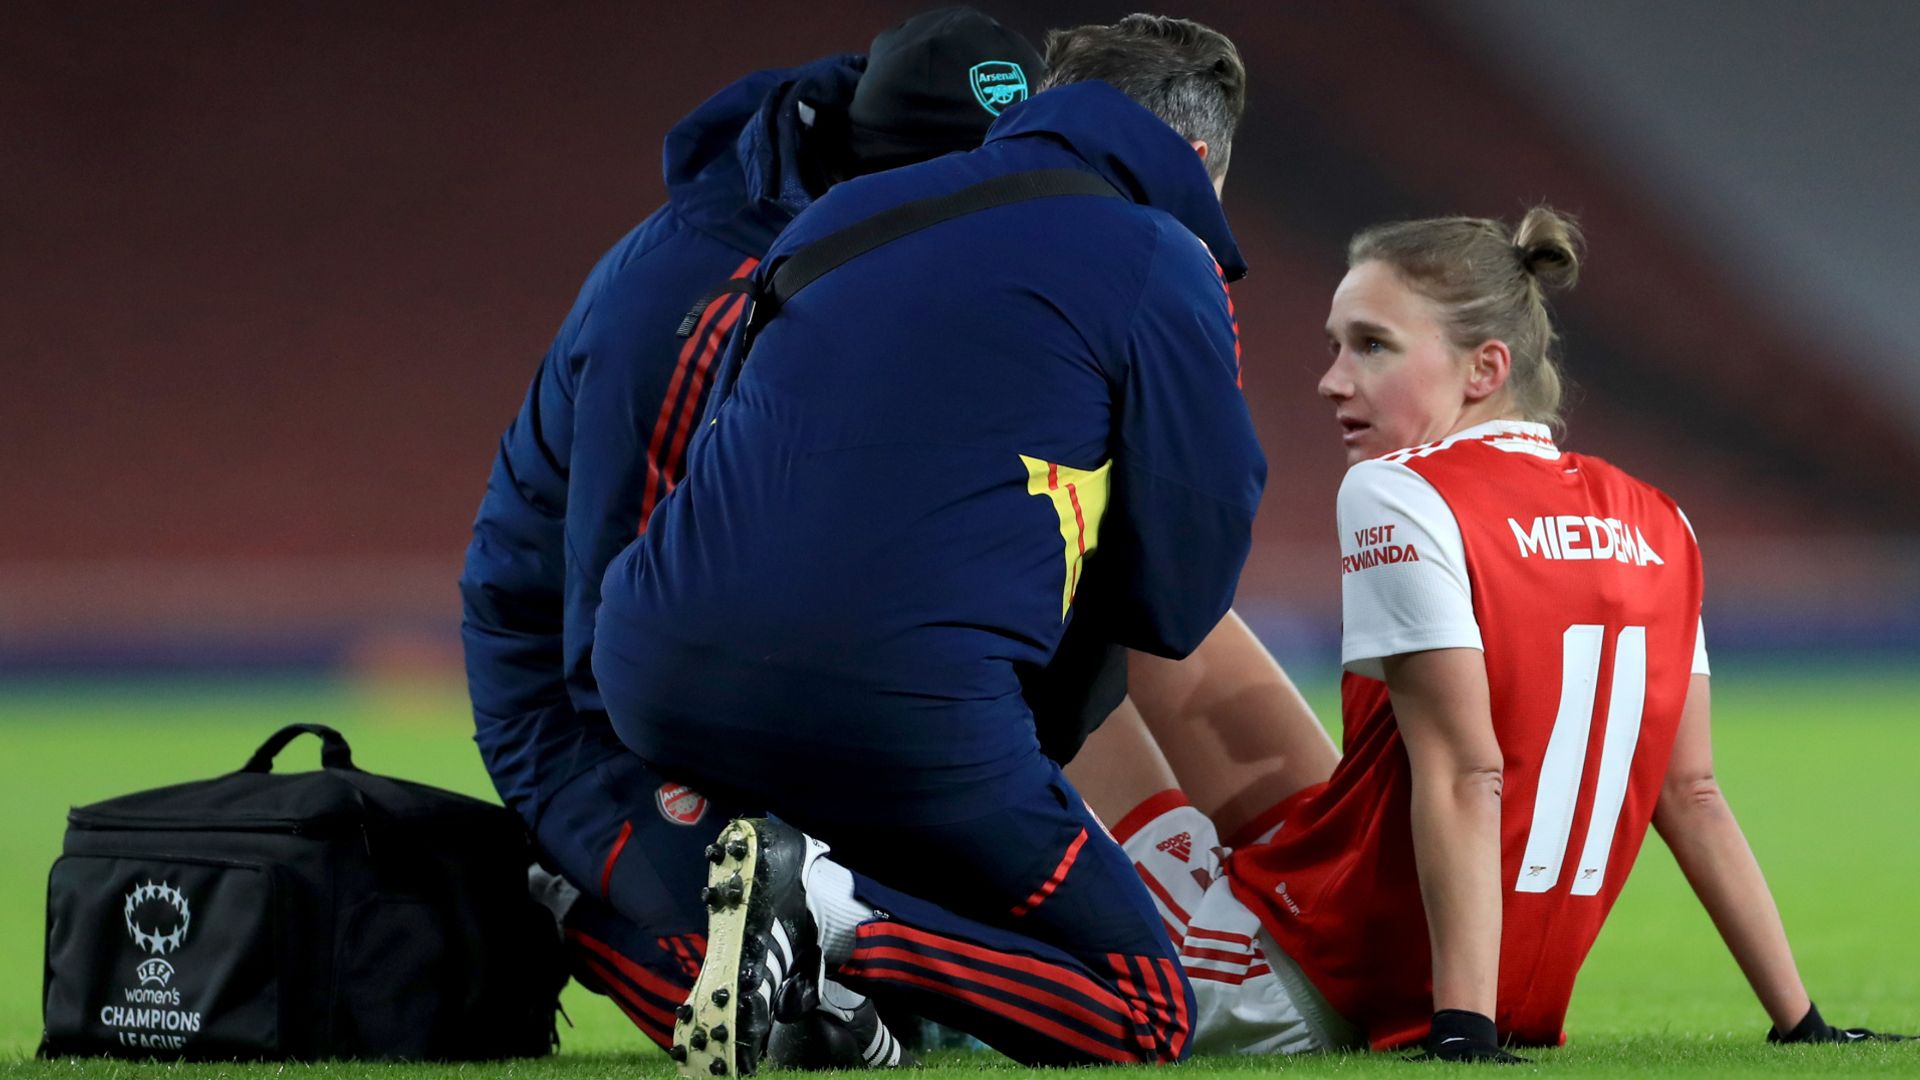 Research into ACL injuries in women's sport 'disparate and slow'